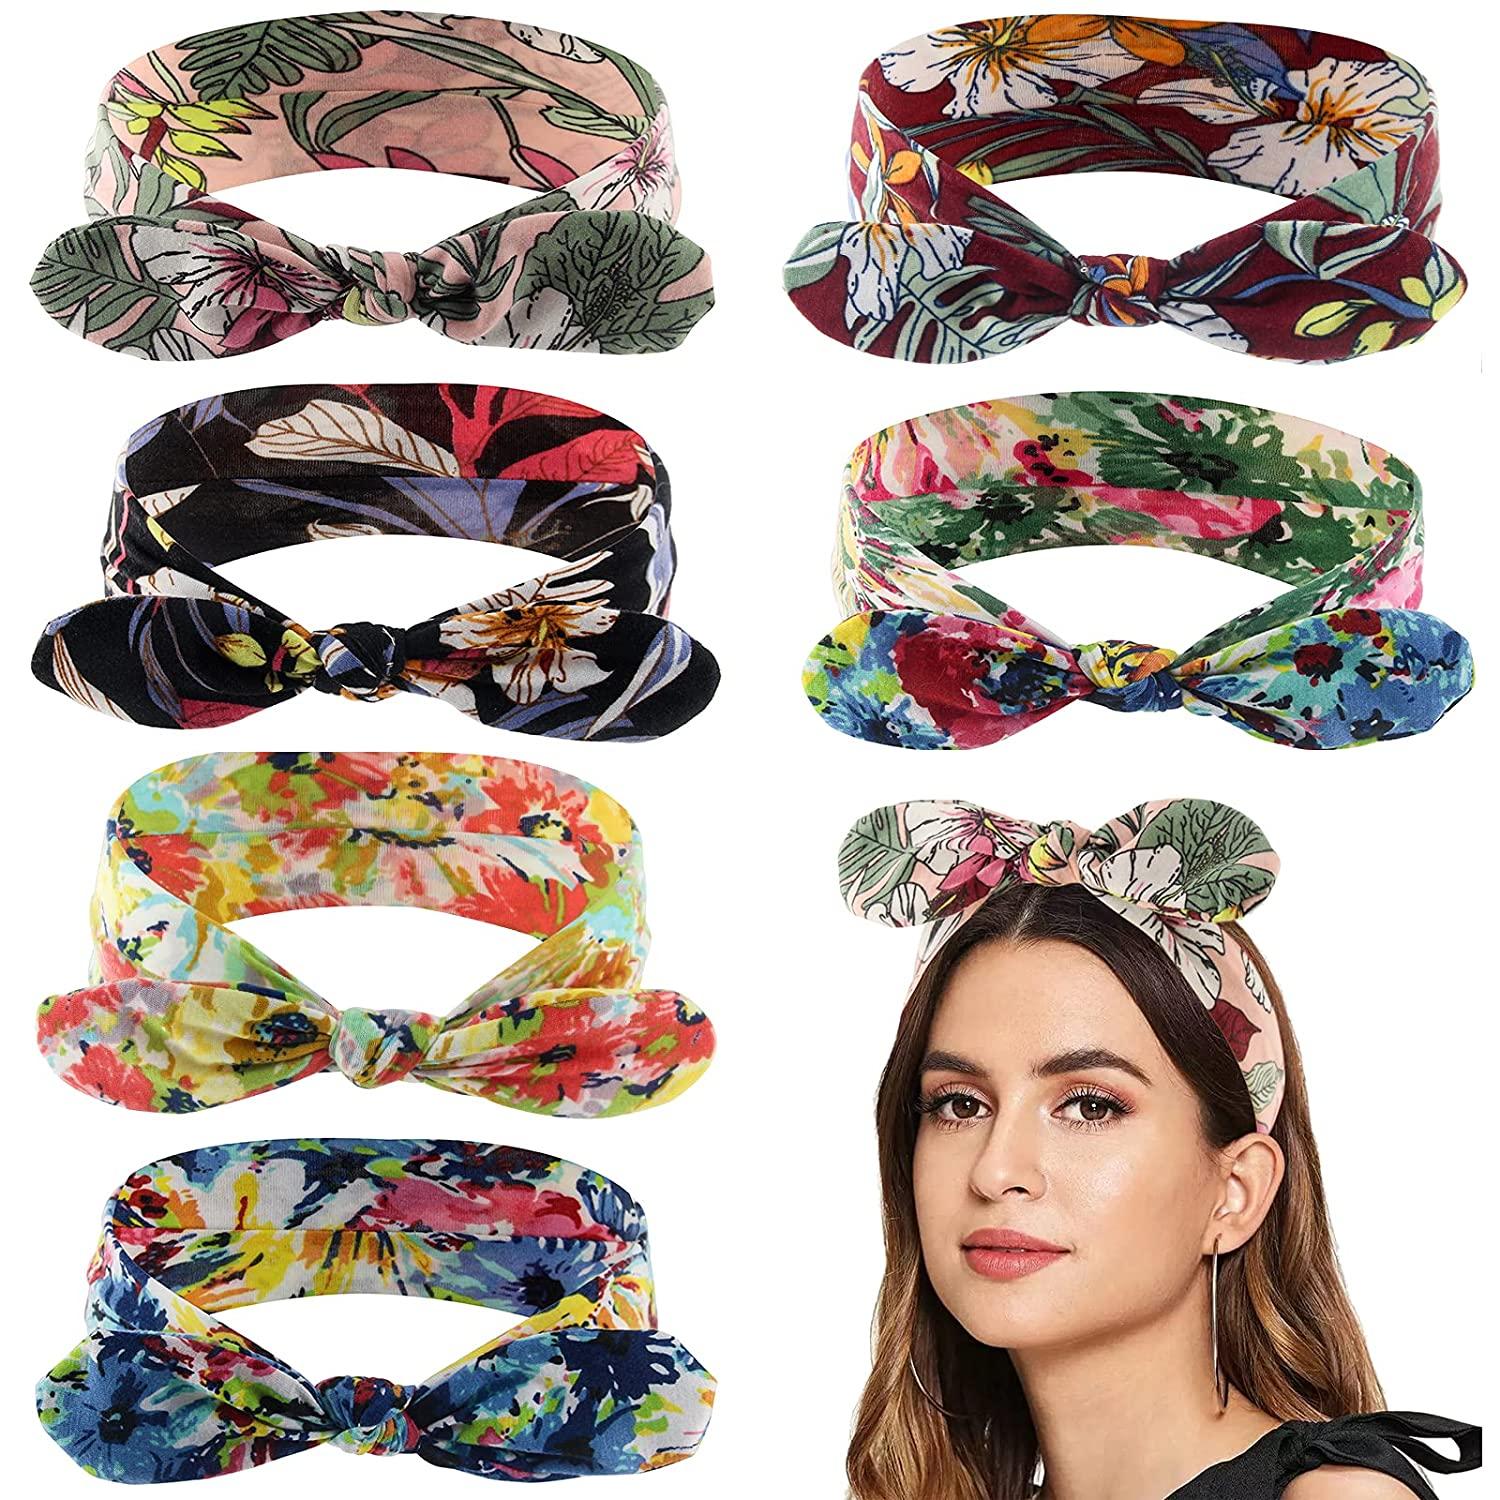 Yeshan Bow Headbands for Women Boho Wide Bandana Headbands Flower Printed Rabbit  Ears Hair Bands Fashion and Sport Hair Accessories for Women and Girls,Pack  of 6 No5(flowers 6 pcs)